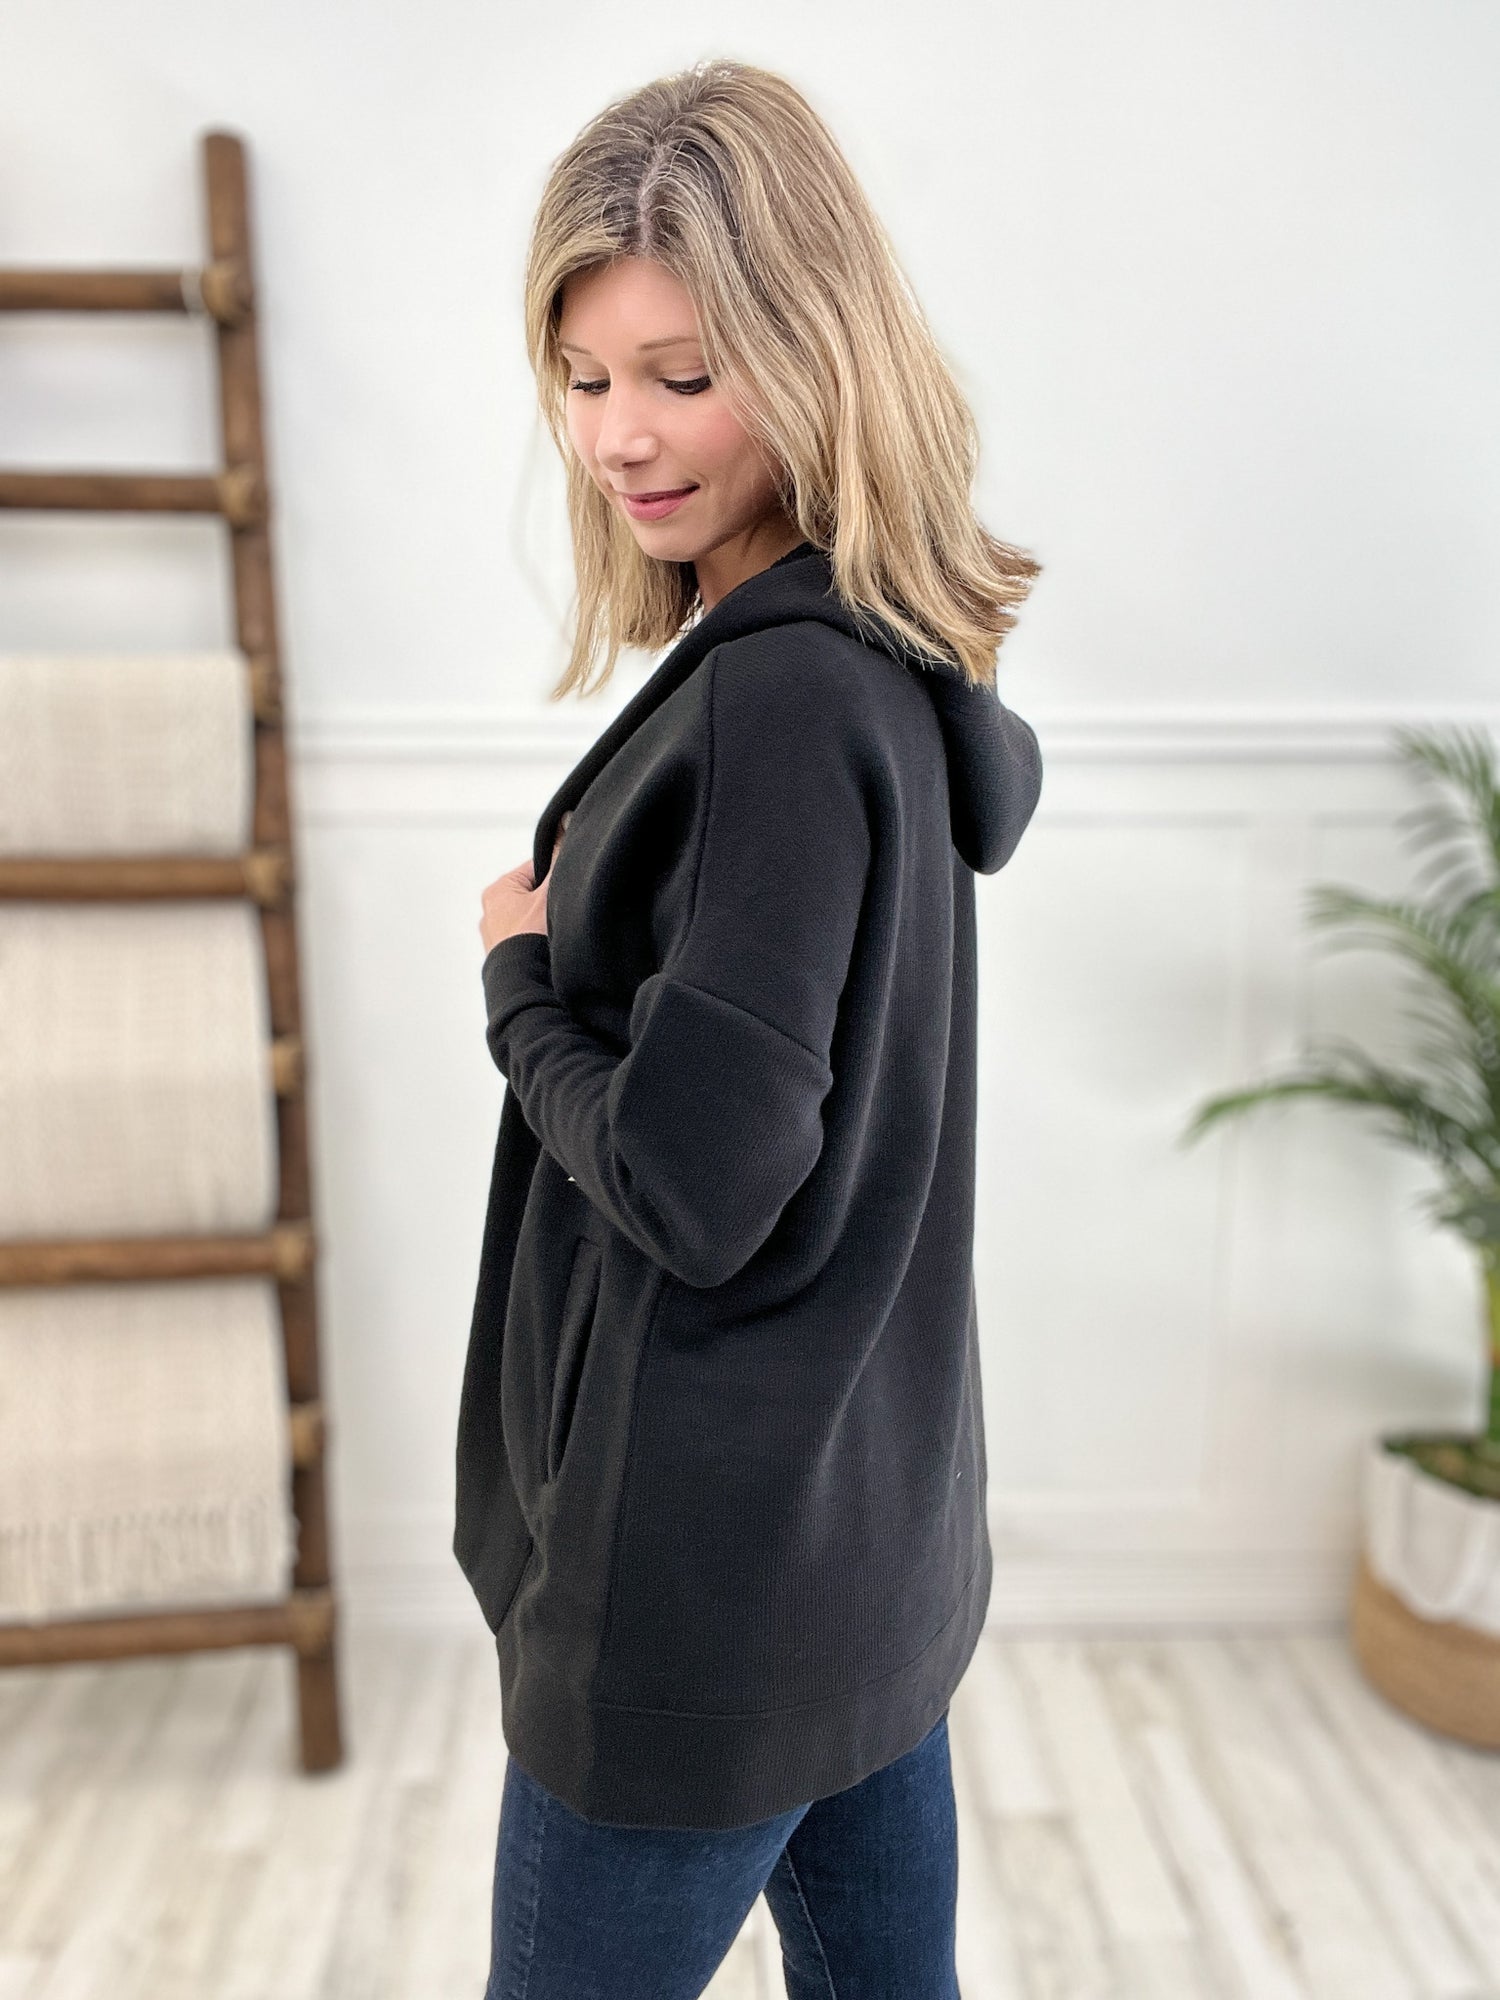 The Cozy Complement Cardigan